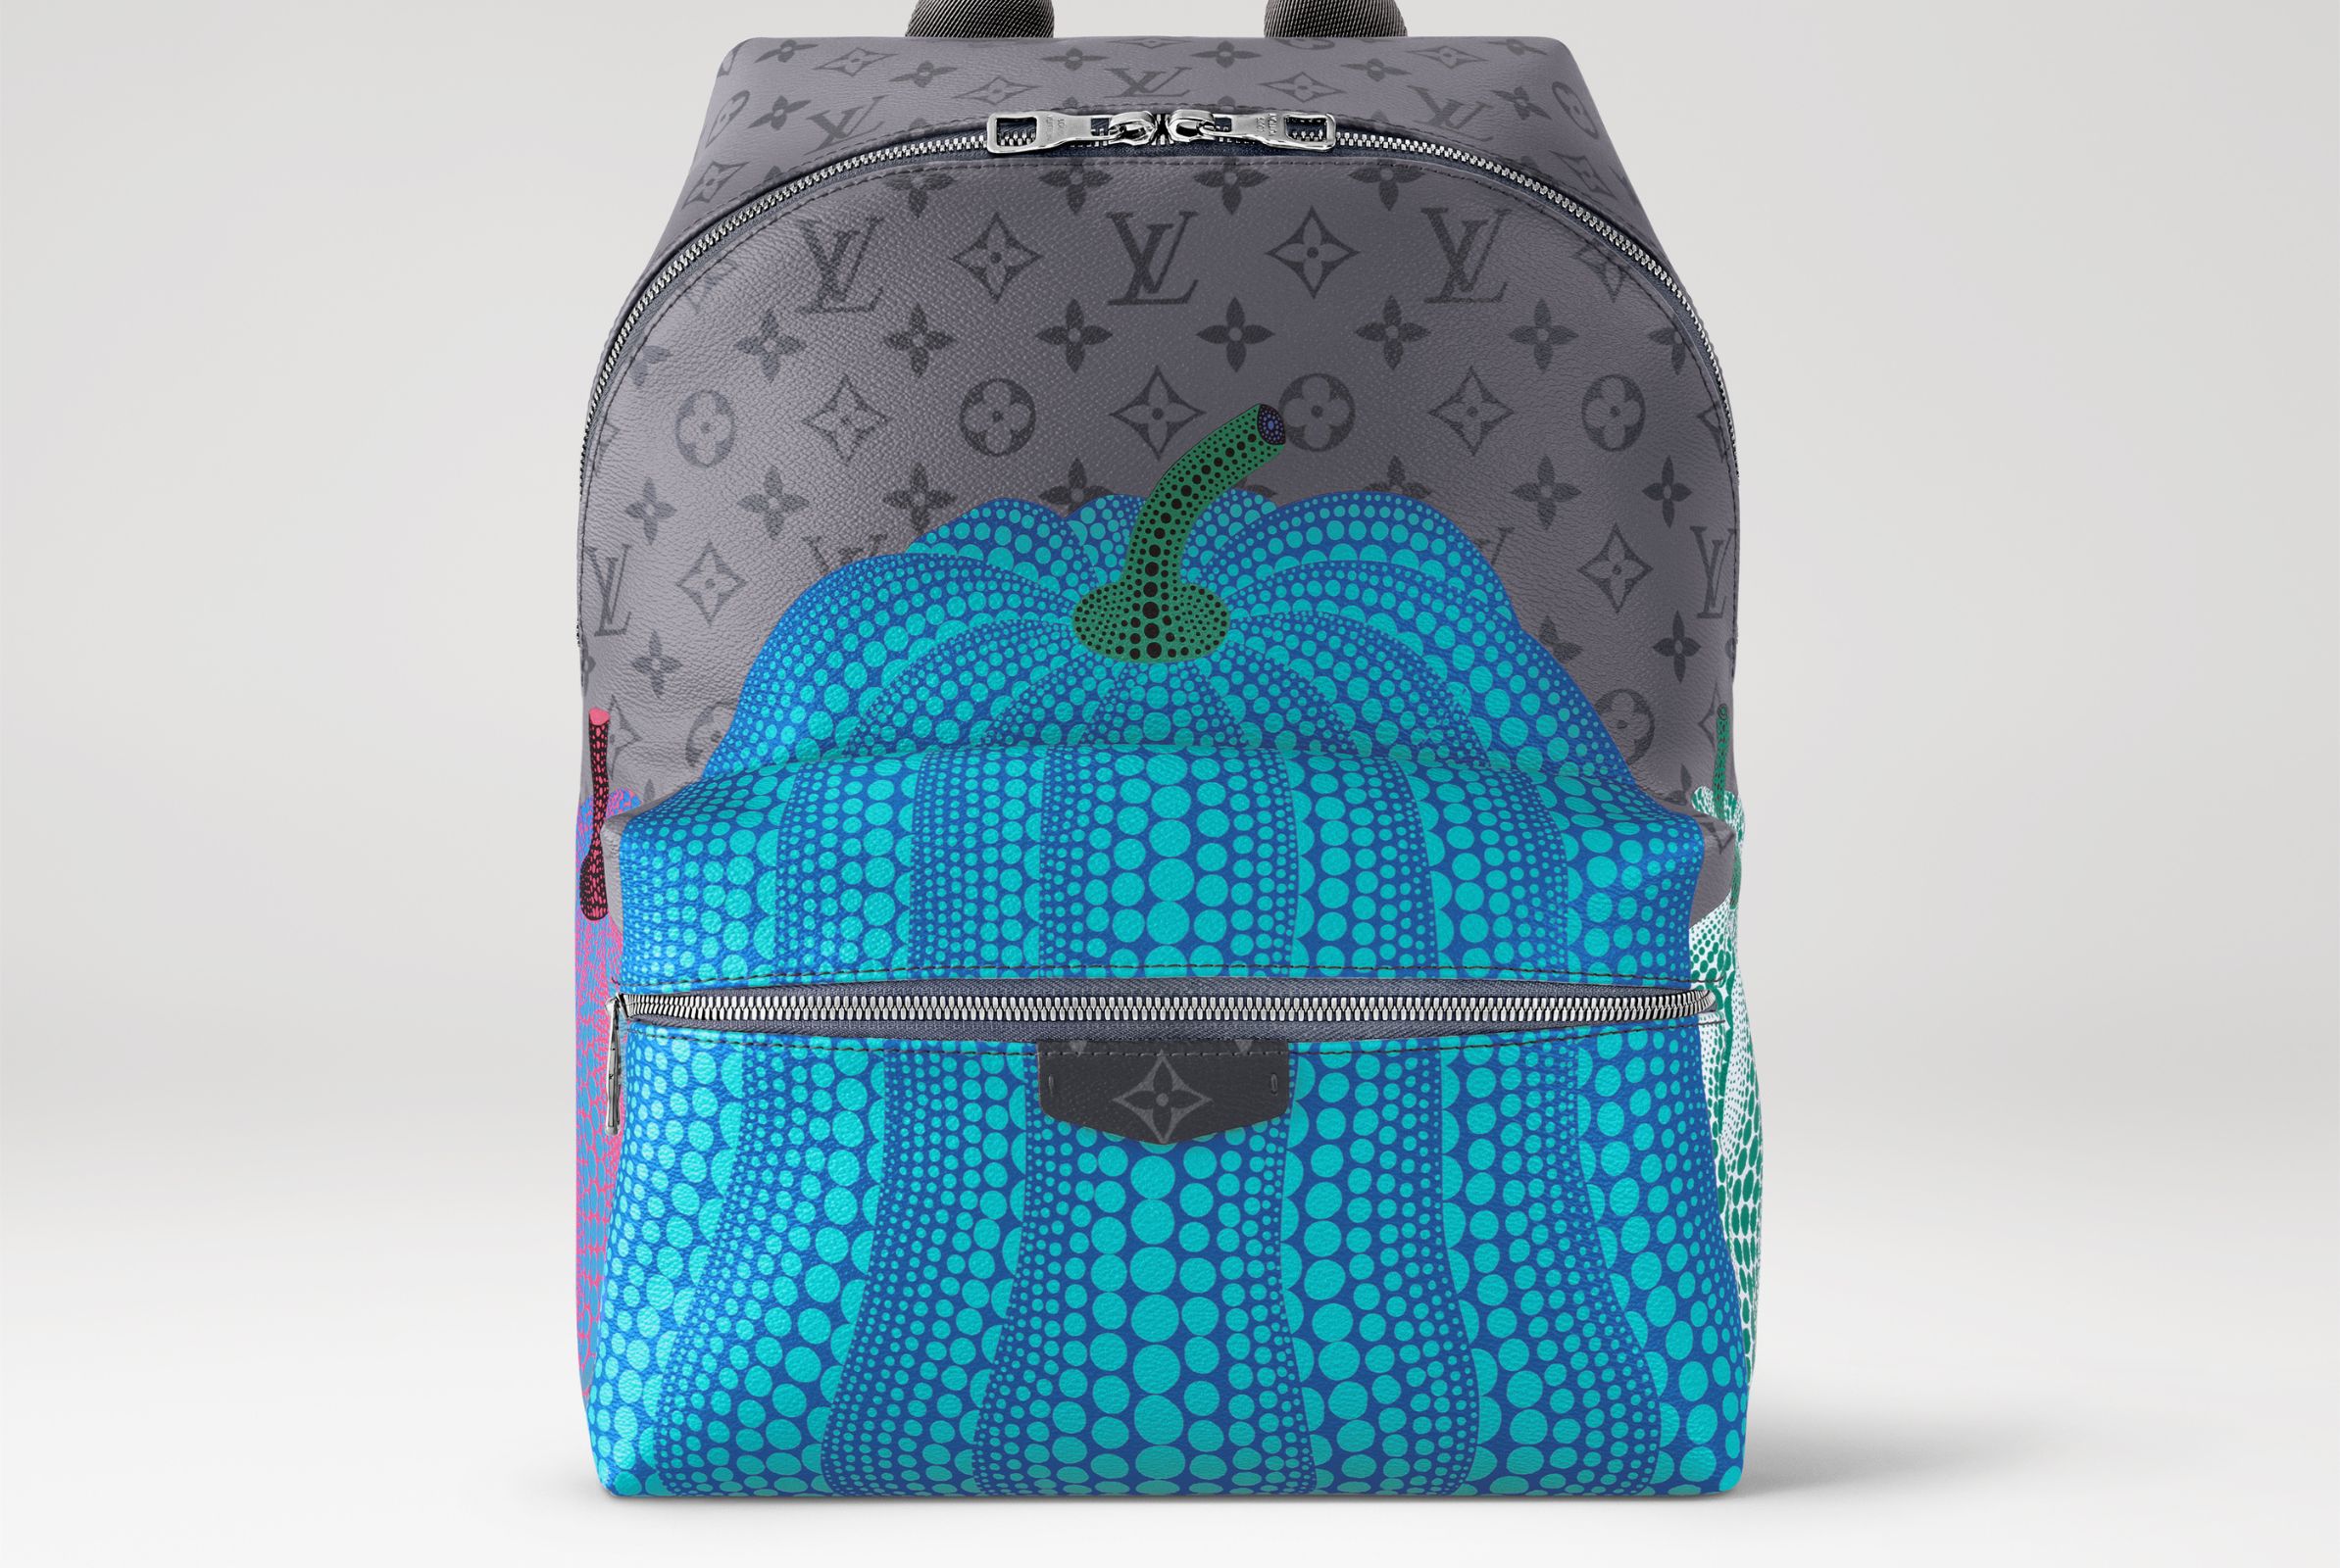 Discovery Backpack Louis Vuitton and Yayoi Kusama collaboration